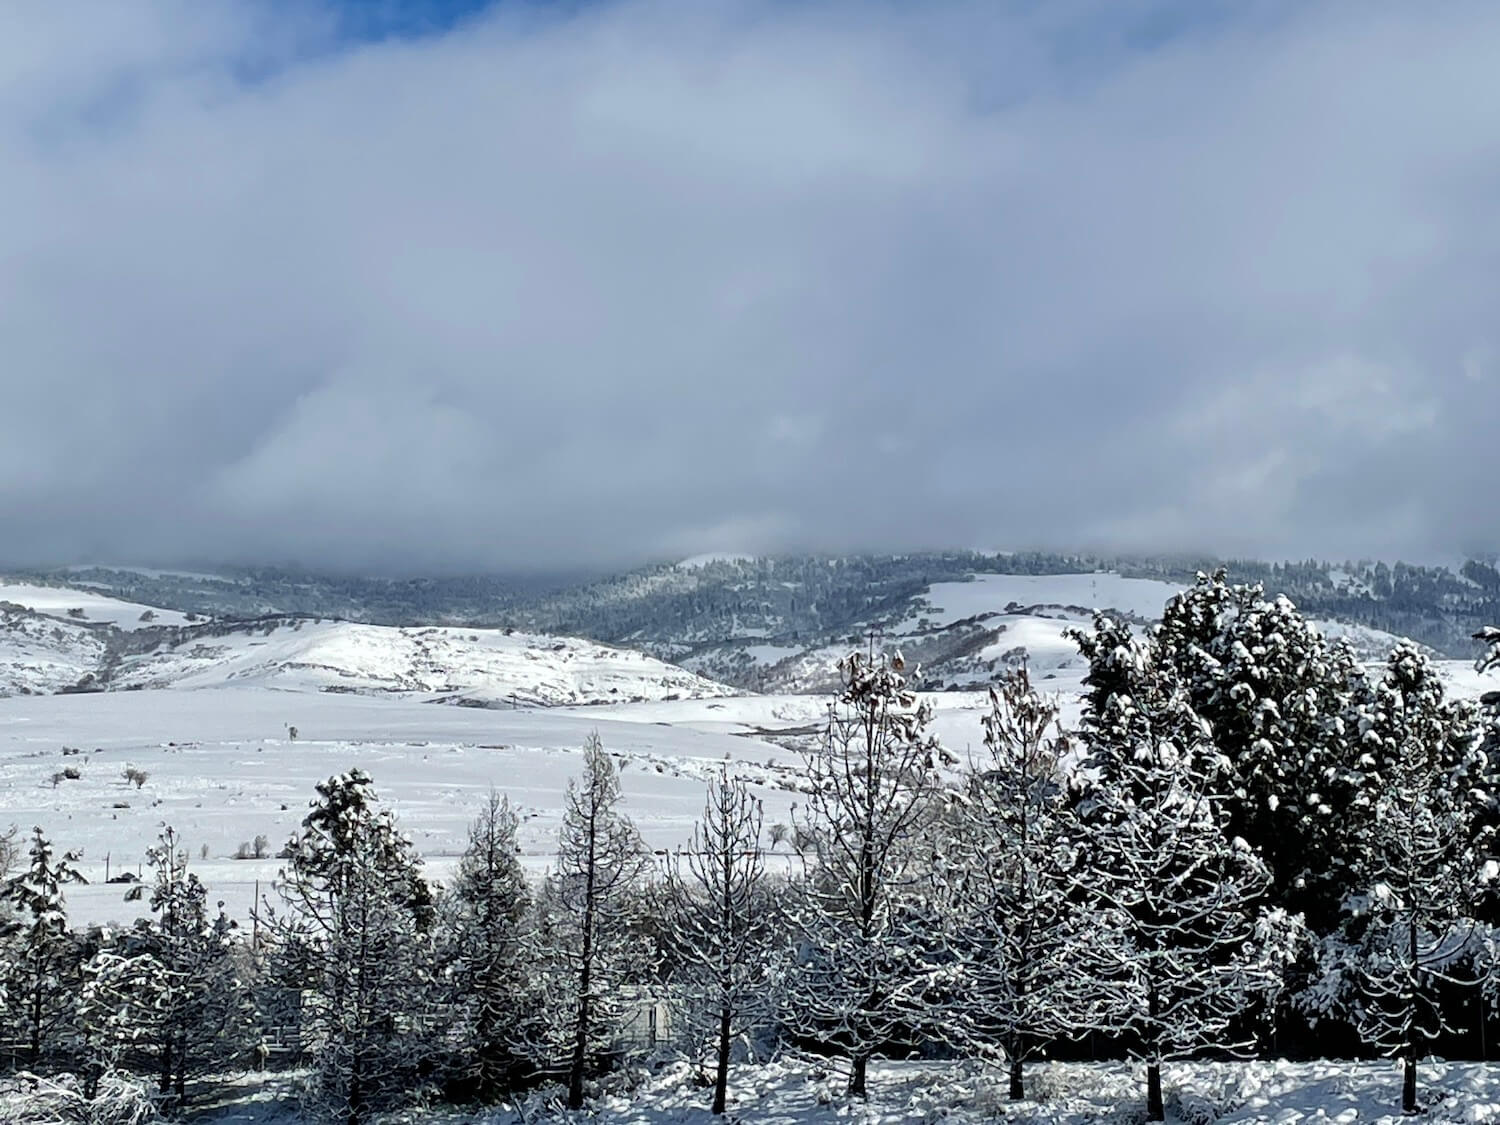 Clouds over the tops of foothills covered in snow, with trees with snow clinging to them on the foreground.